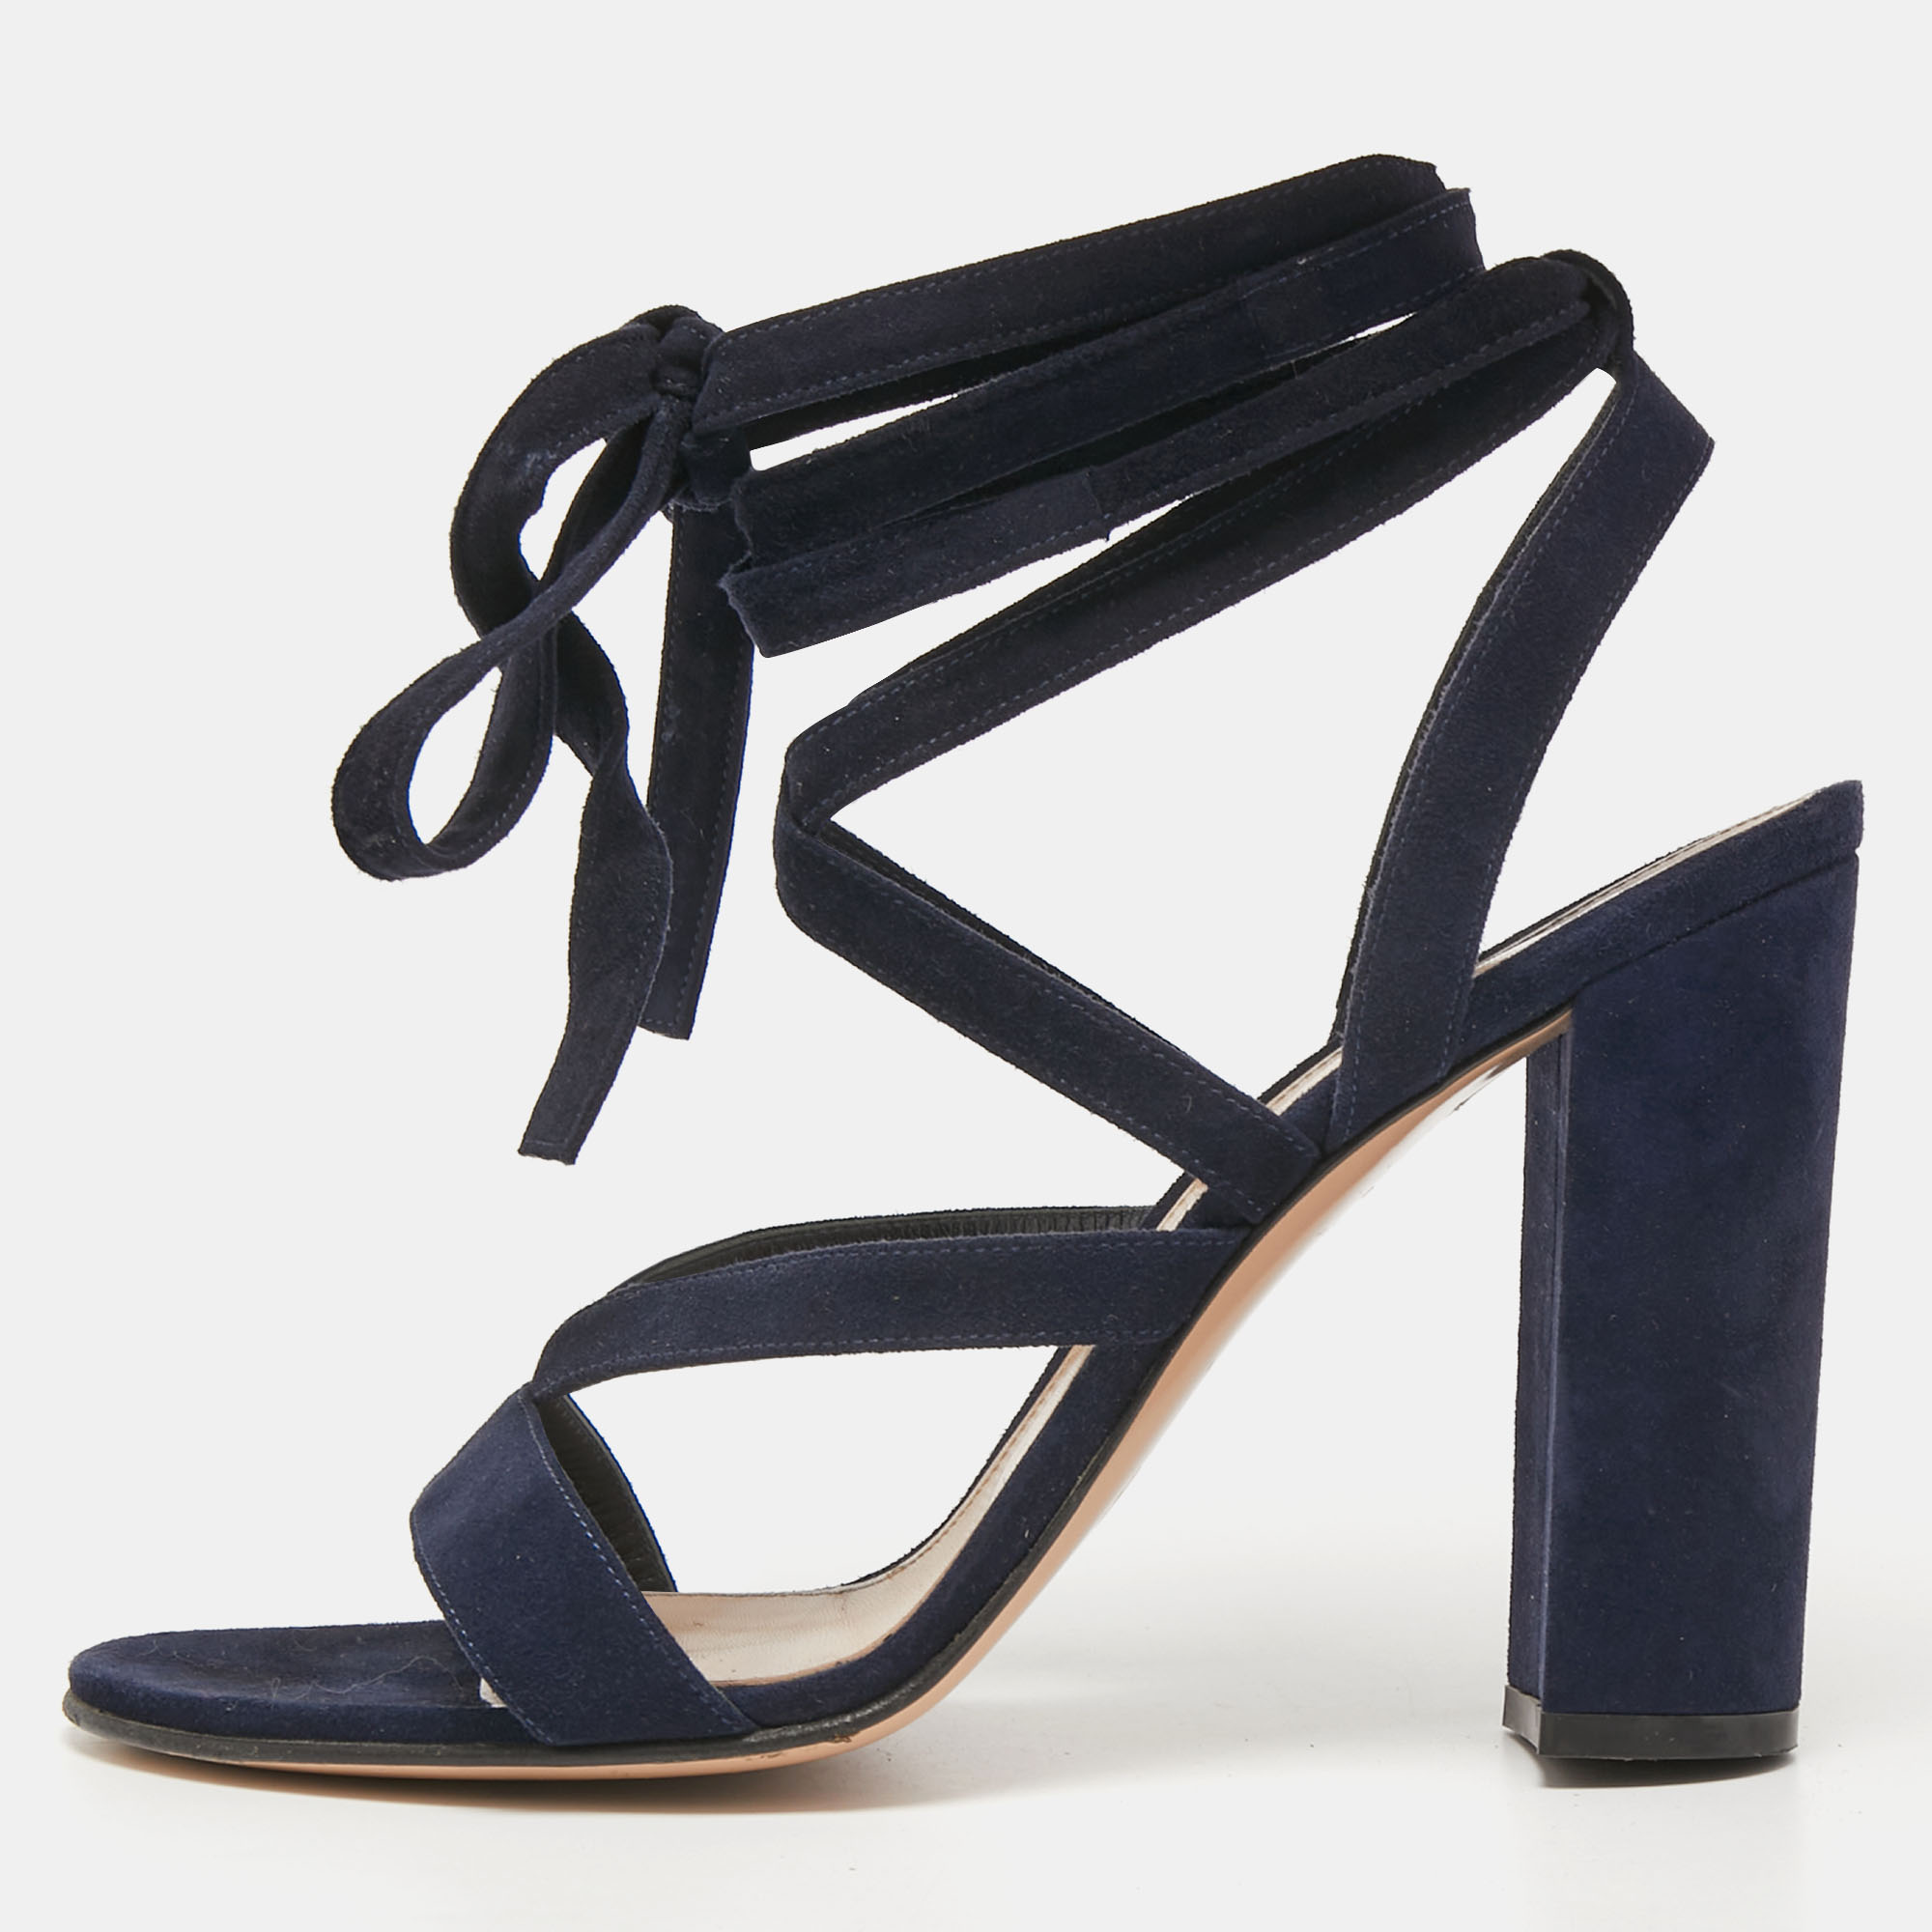 Pre-owned Gianvito Rossi Navy Blue Suede Ankle Wrap Sandals Size 40